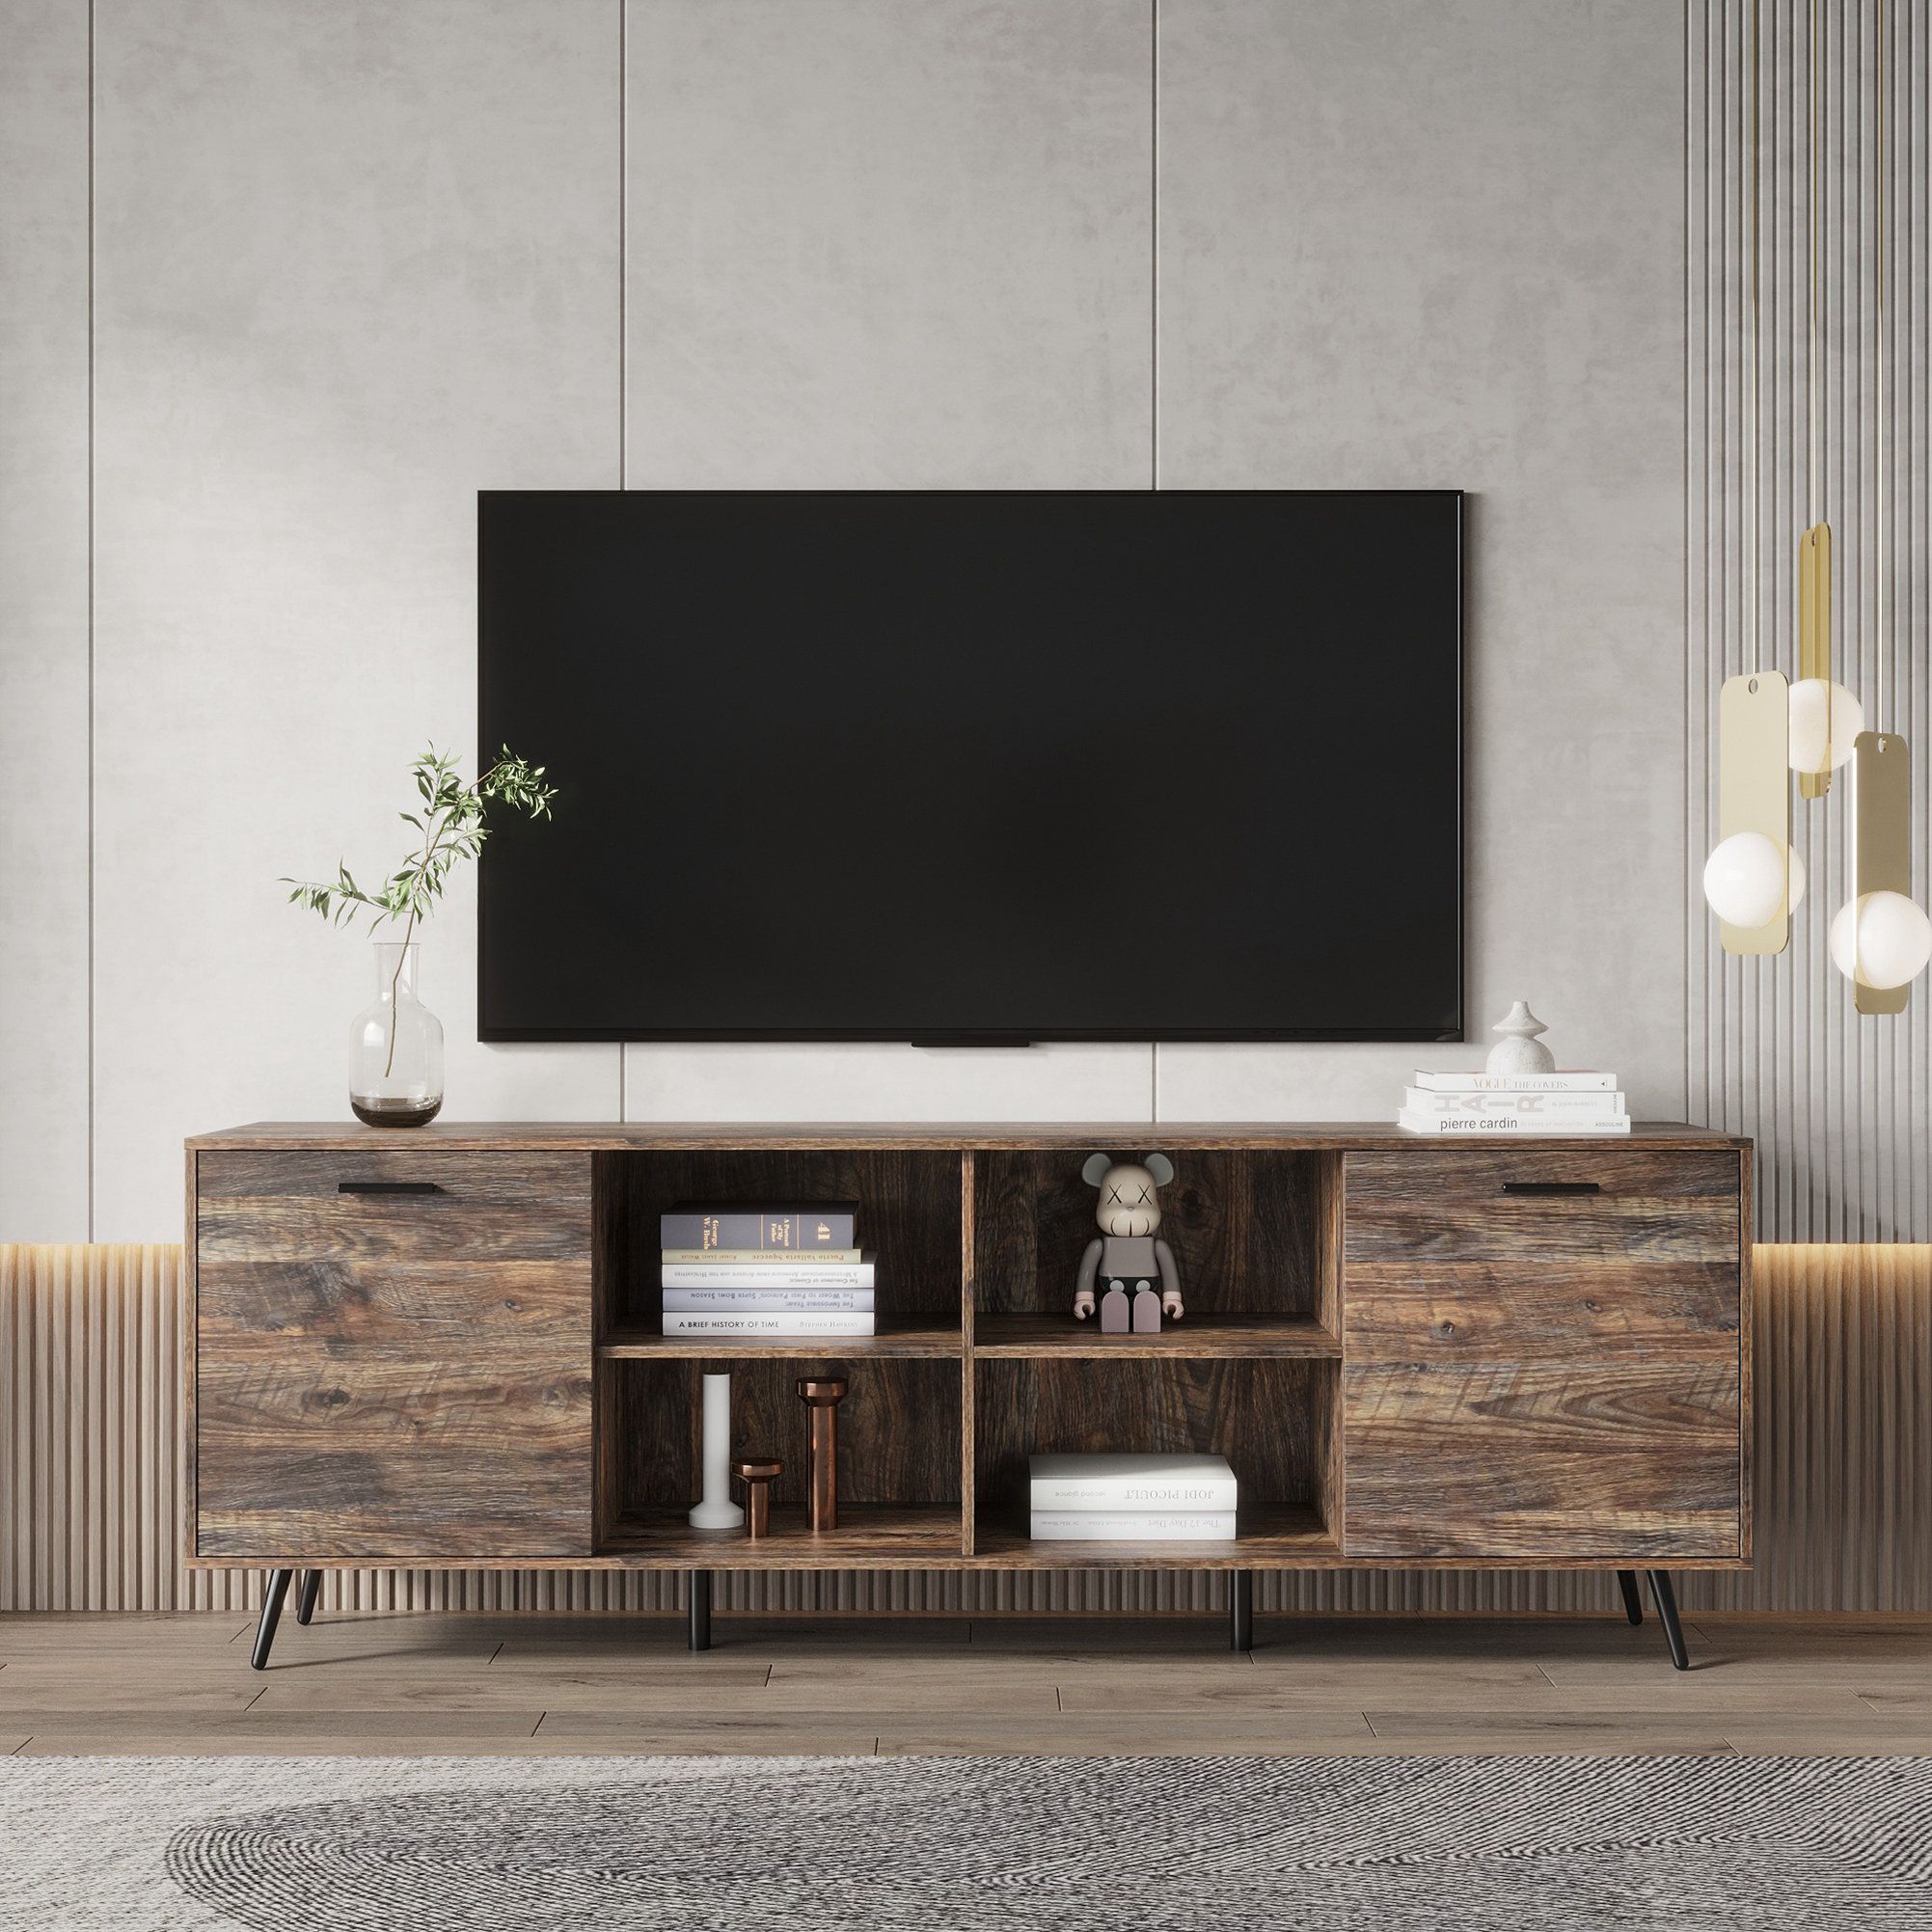 George Oliver Jiberrl Modern Entertainment Center Adjustable Storage Cabinet  Tv Console For Living Room | Wayfair For Entertainment Center With Storage Cabinet (View 4 of 15)